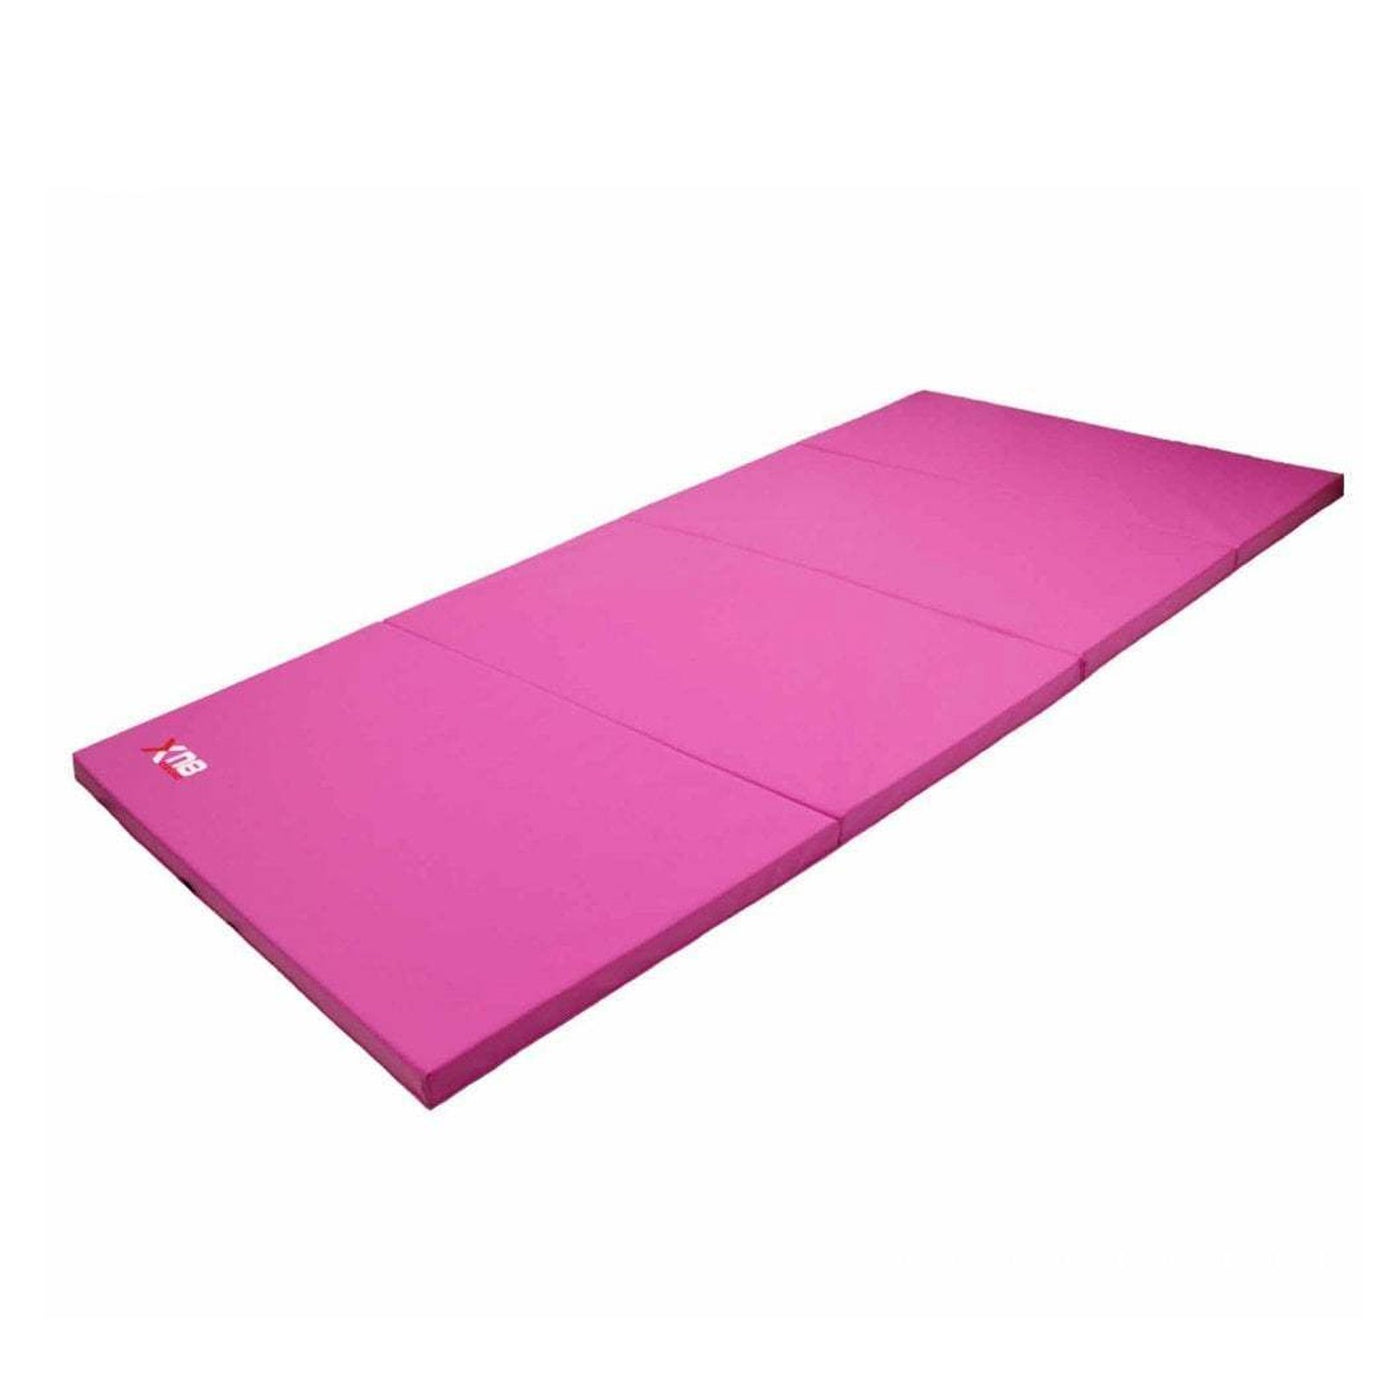 Xn8 Sports Gymnastic Mats For Home Pink